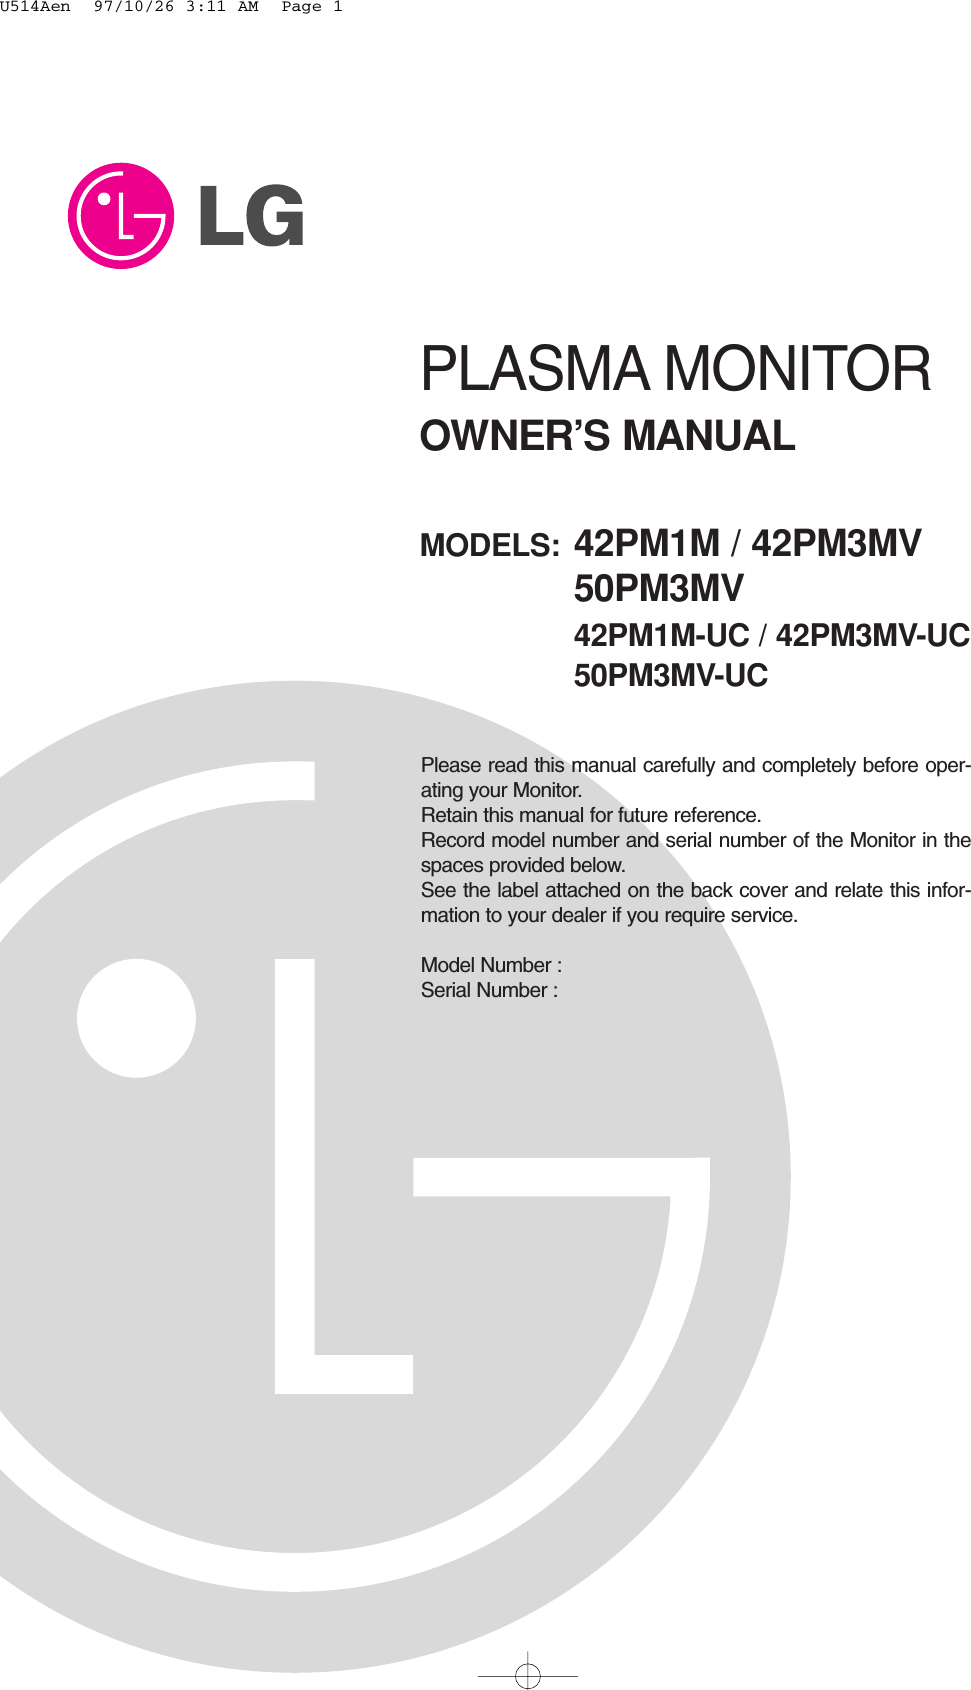 PLASMA MONITOROWNER’S MANUALPlease read this manual carefully and completely before oper-ating your Monitor. Retain this manual for future reference.Record model number and serial number of the Monitor in thespaces provided below. See the label attached on the back cover and relate this infor-mation to your dealer if you require service.Model Number : Serial Number : MODELS: 42PM1M / 42PM3MV50PM3MV42PM1M-UC / 42PM3MV-UC50PM3MV-UCU514Aen  97/10/26 3:11 AM  Page 1